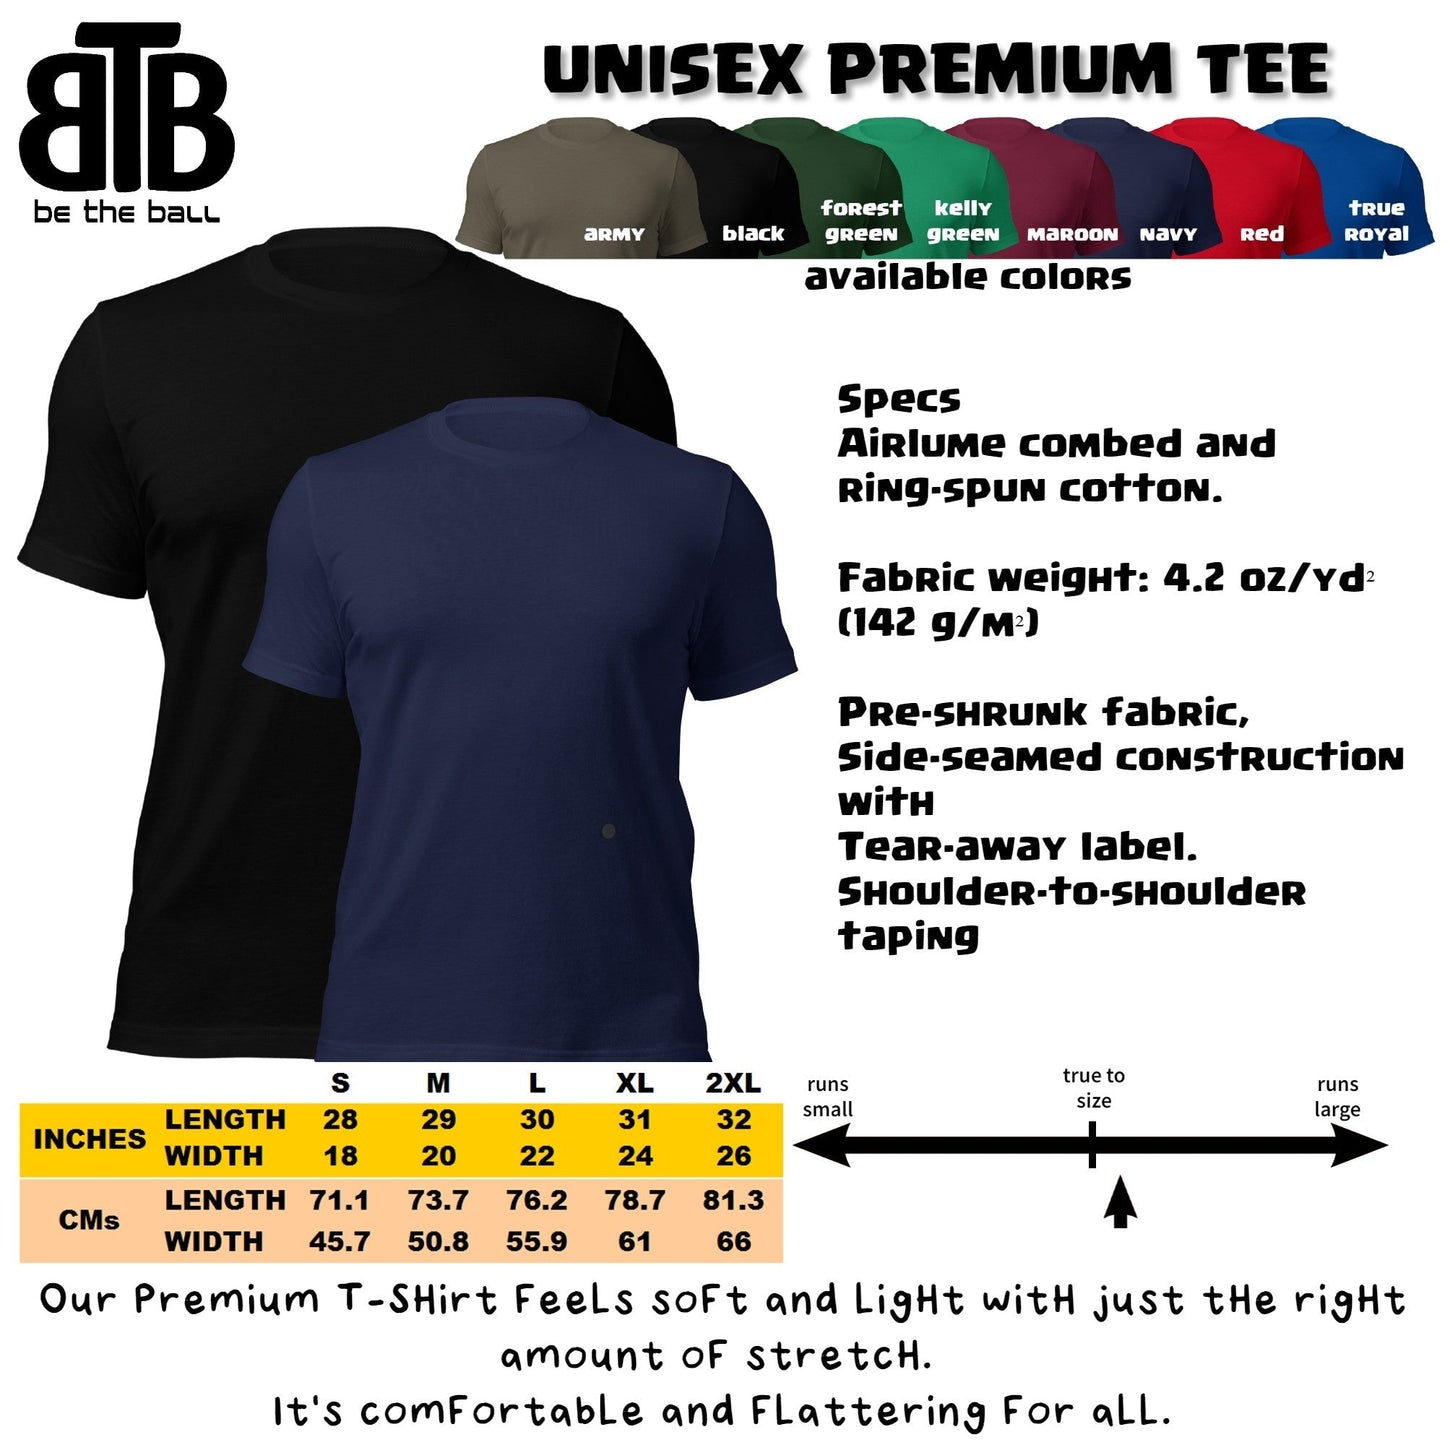 Golf Is Importanter Golf TShirt and Hoodie is a Creative Golf Graphic design for Men and Women